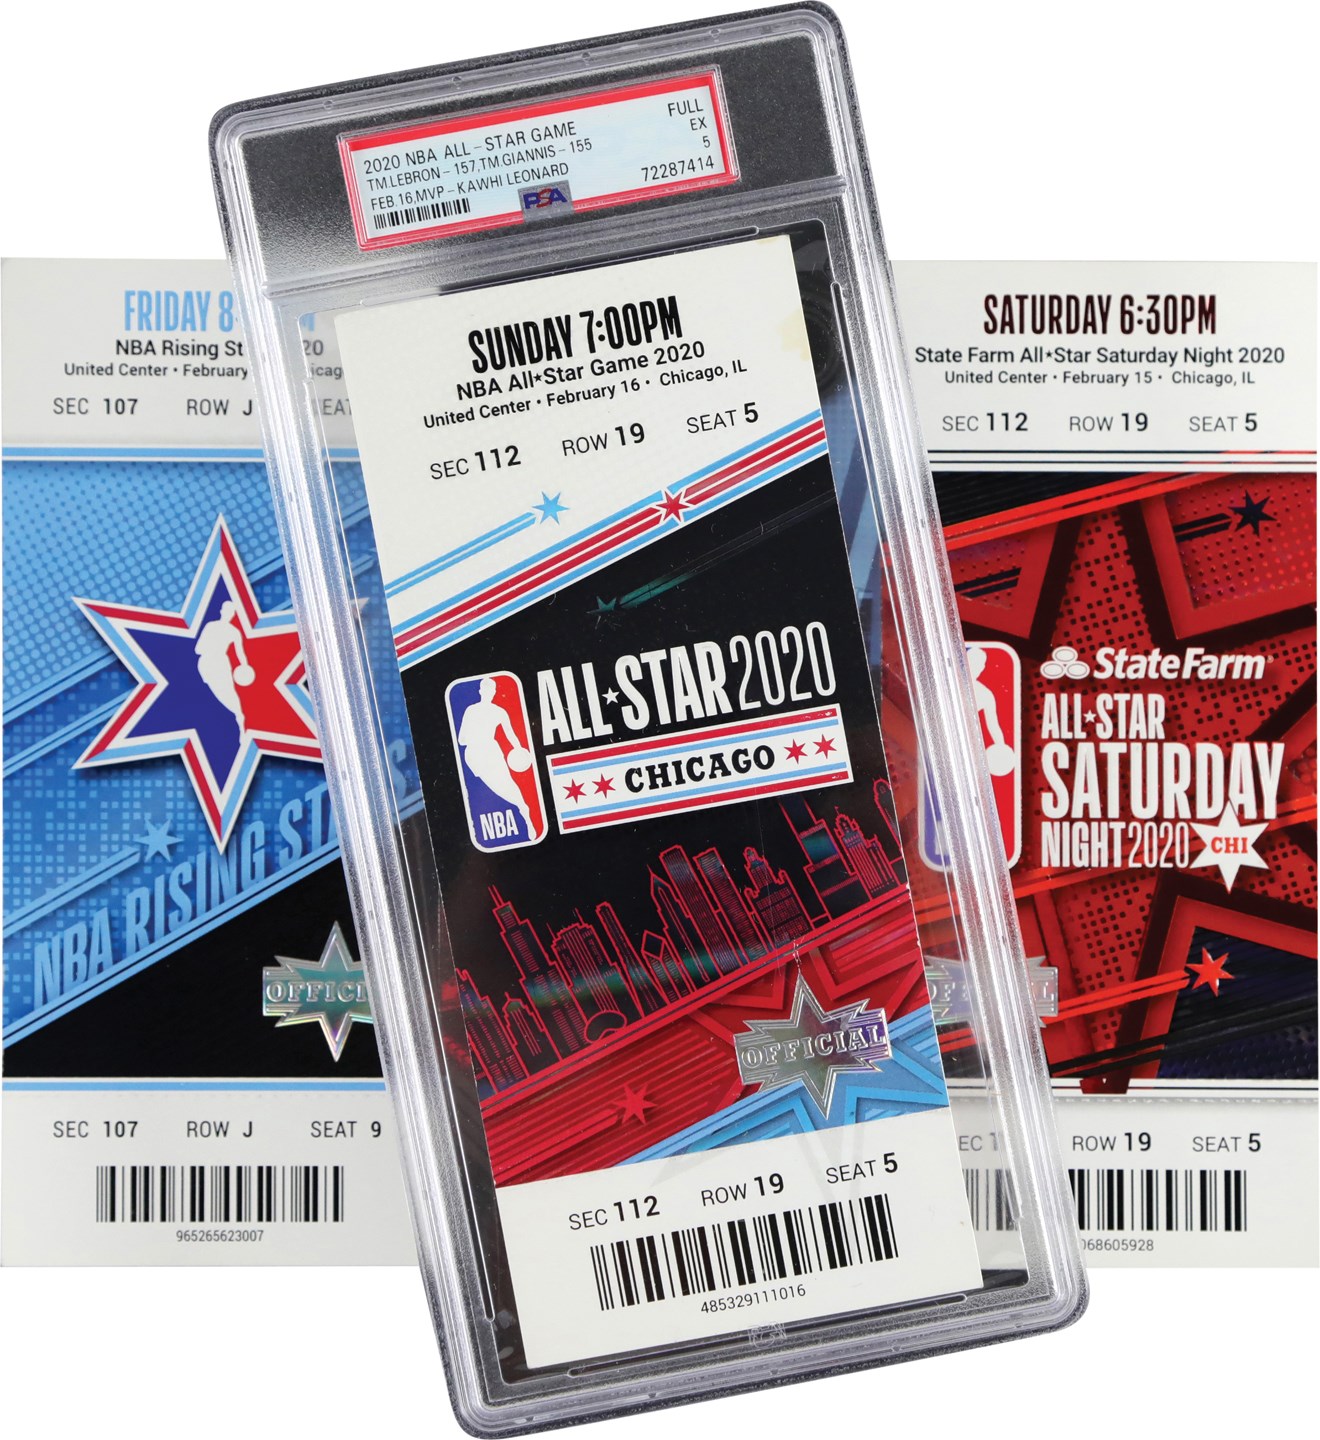 - 2020 NBA All-Star Game Full Ticket with Additional All-Star Weekend Event Tickets